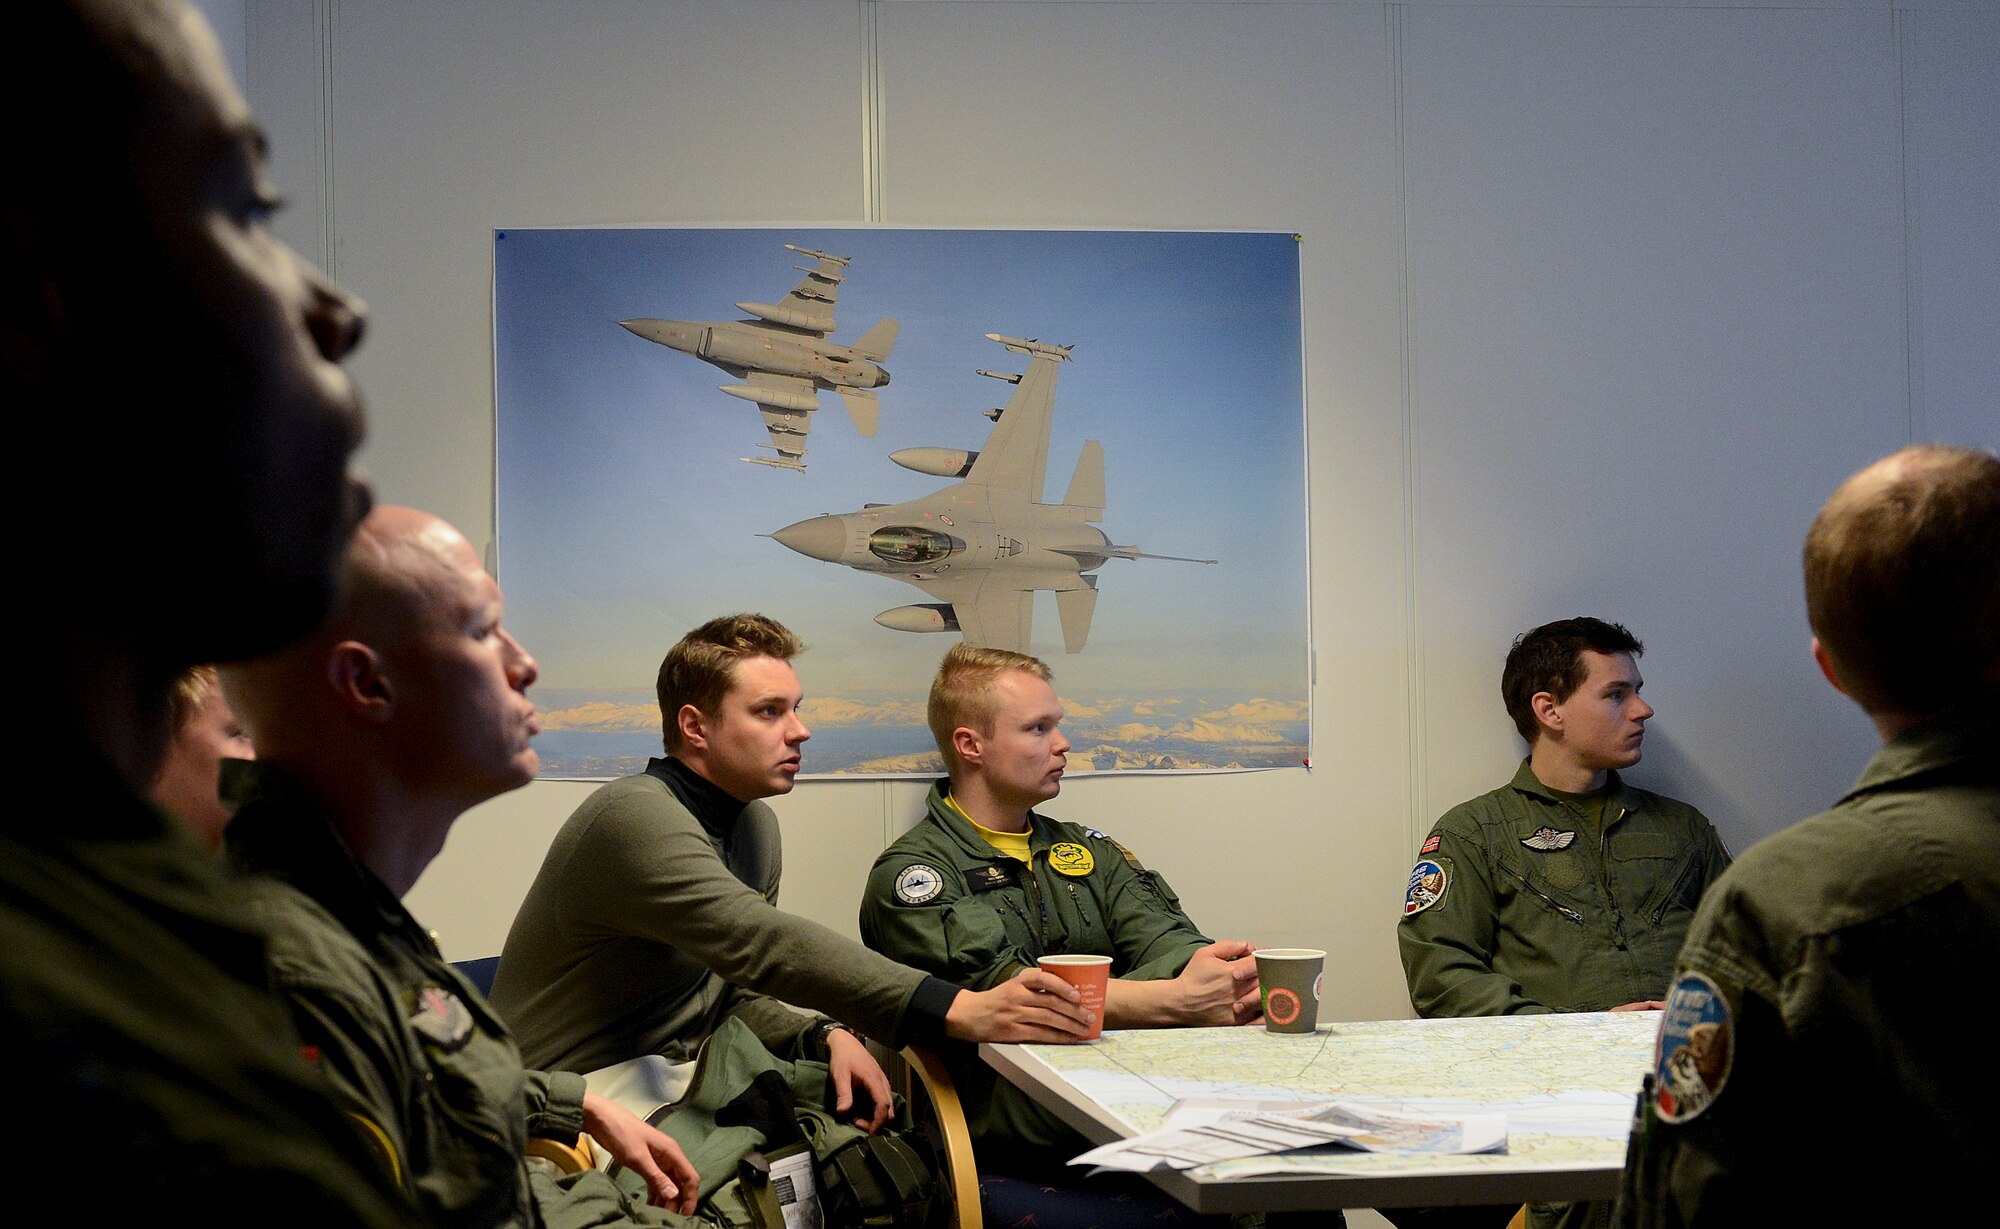 U.S., Swedish, Norwegian and Finnish air force aircrew debrief May 7, 2014, after a training mission at Bodo Main Air Station, Norway. The U.S. Air Force worked side-by-side with European allies and partners in the Nordic Defense Cooperation exercise to ensure security, protect global interests, and aid economic bonds. (U.S. Air Force photo/Airman 1st Class Trevor T. McBride)